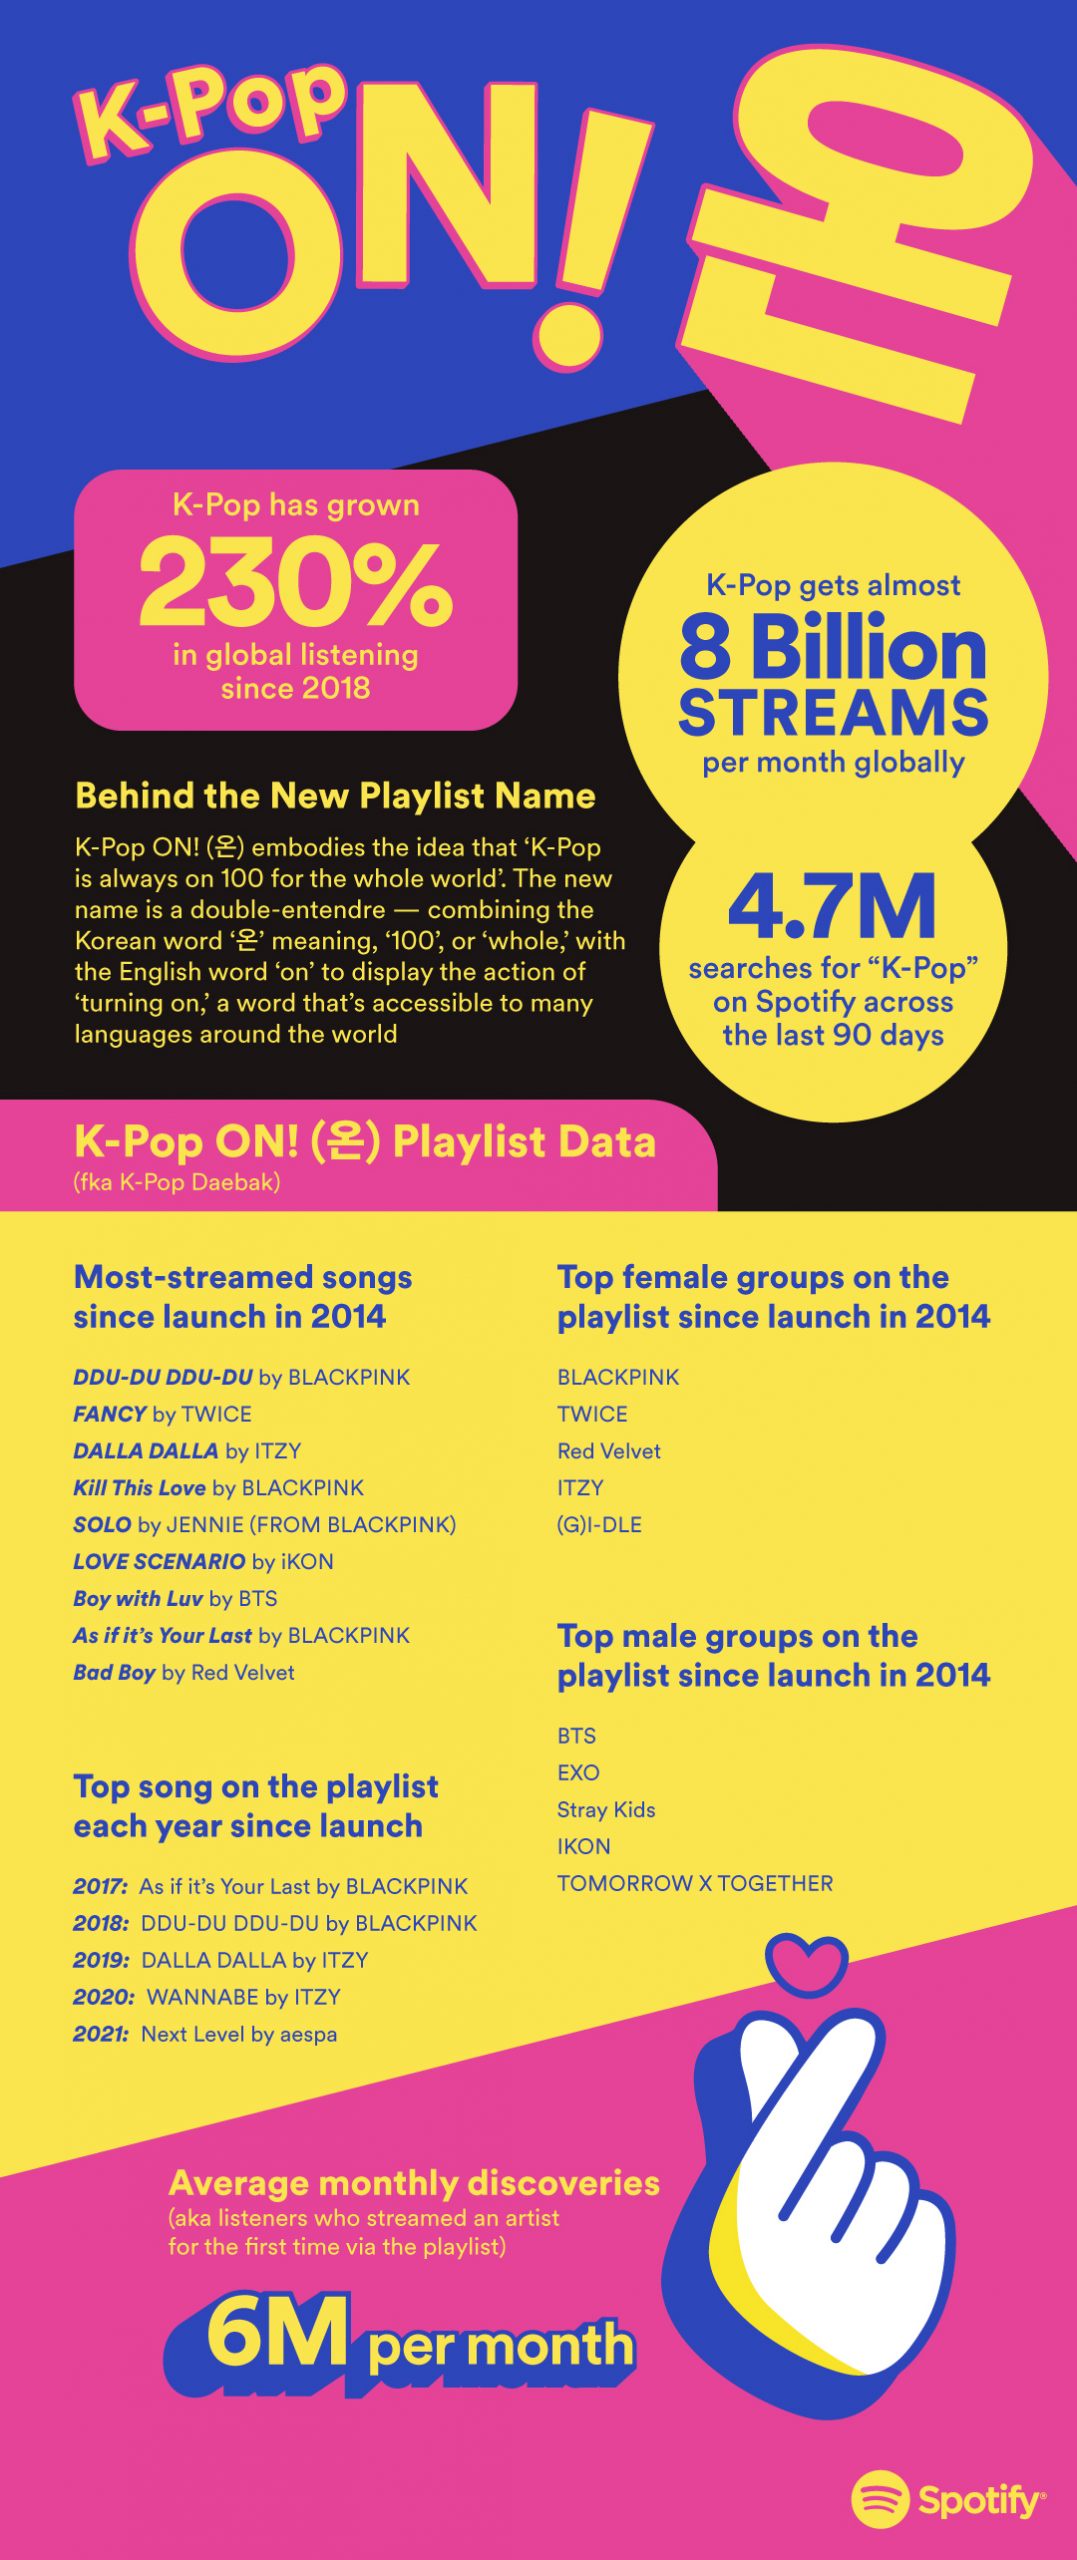 Spotify Takes ON! K-Pop with Global Playlist Relaunch